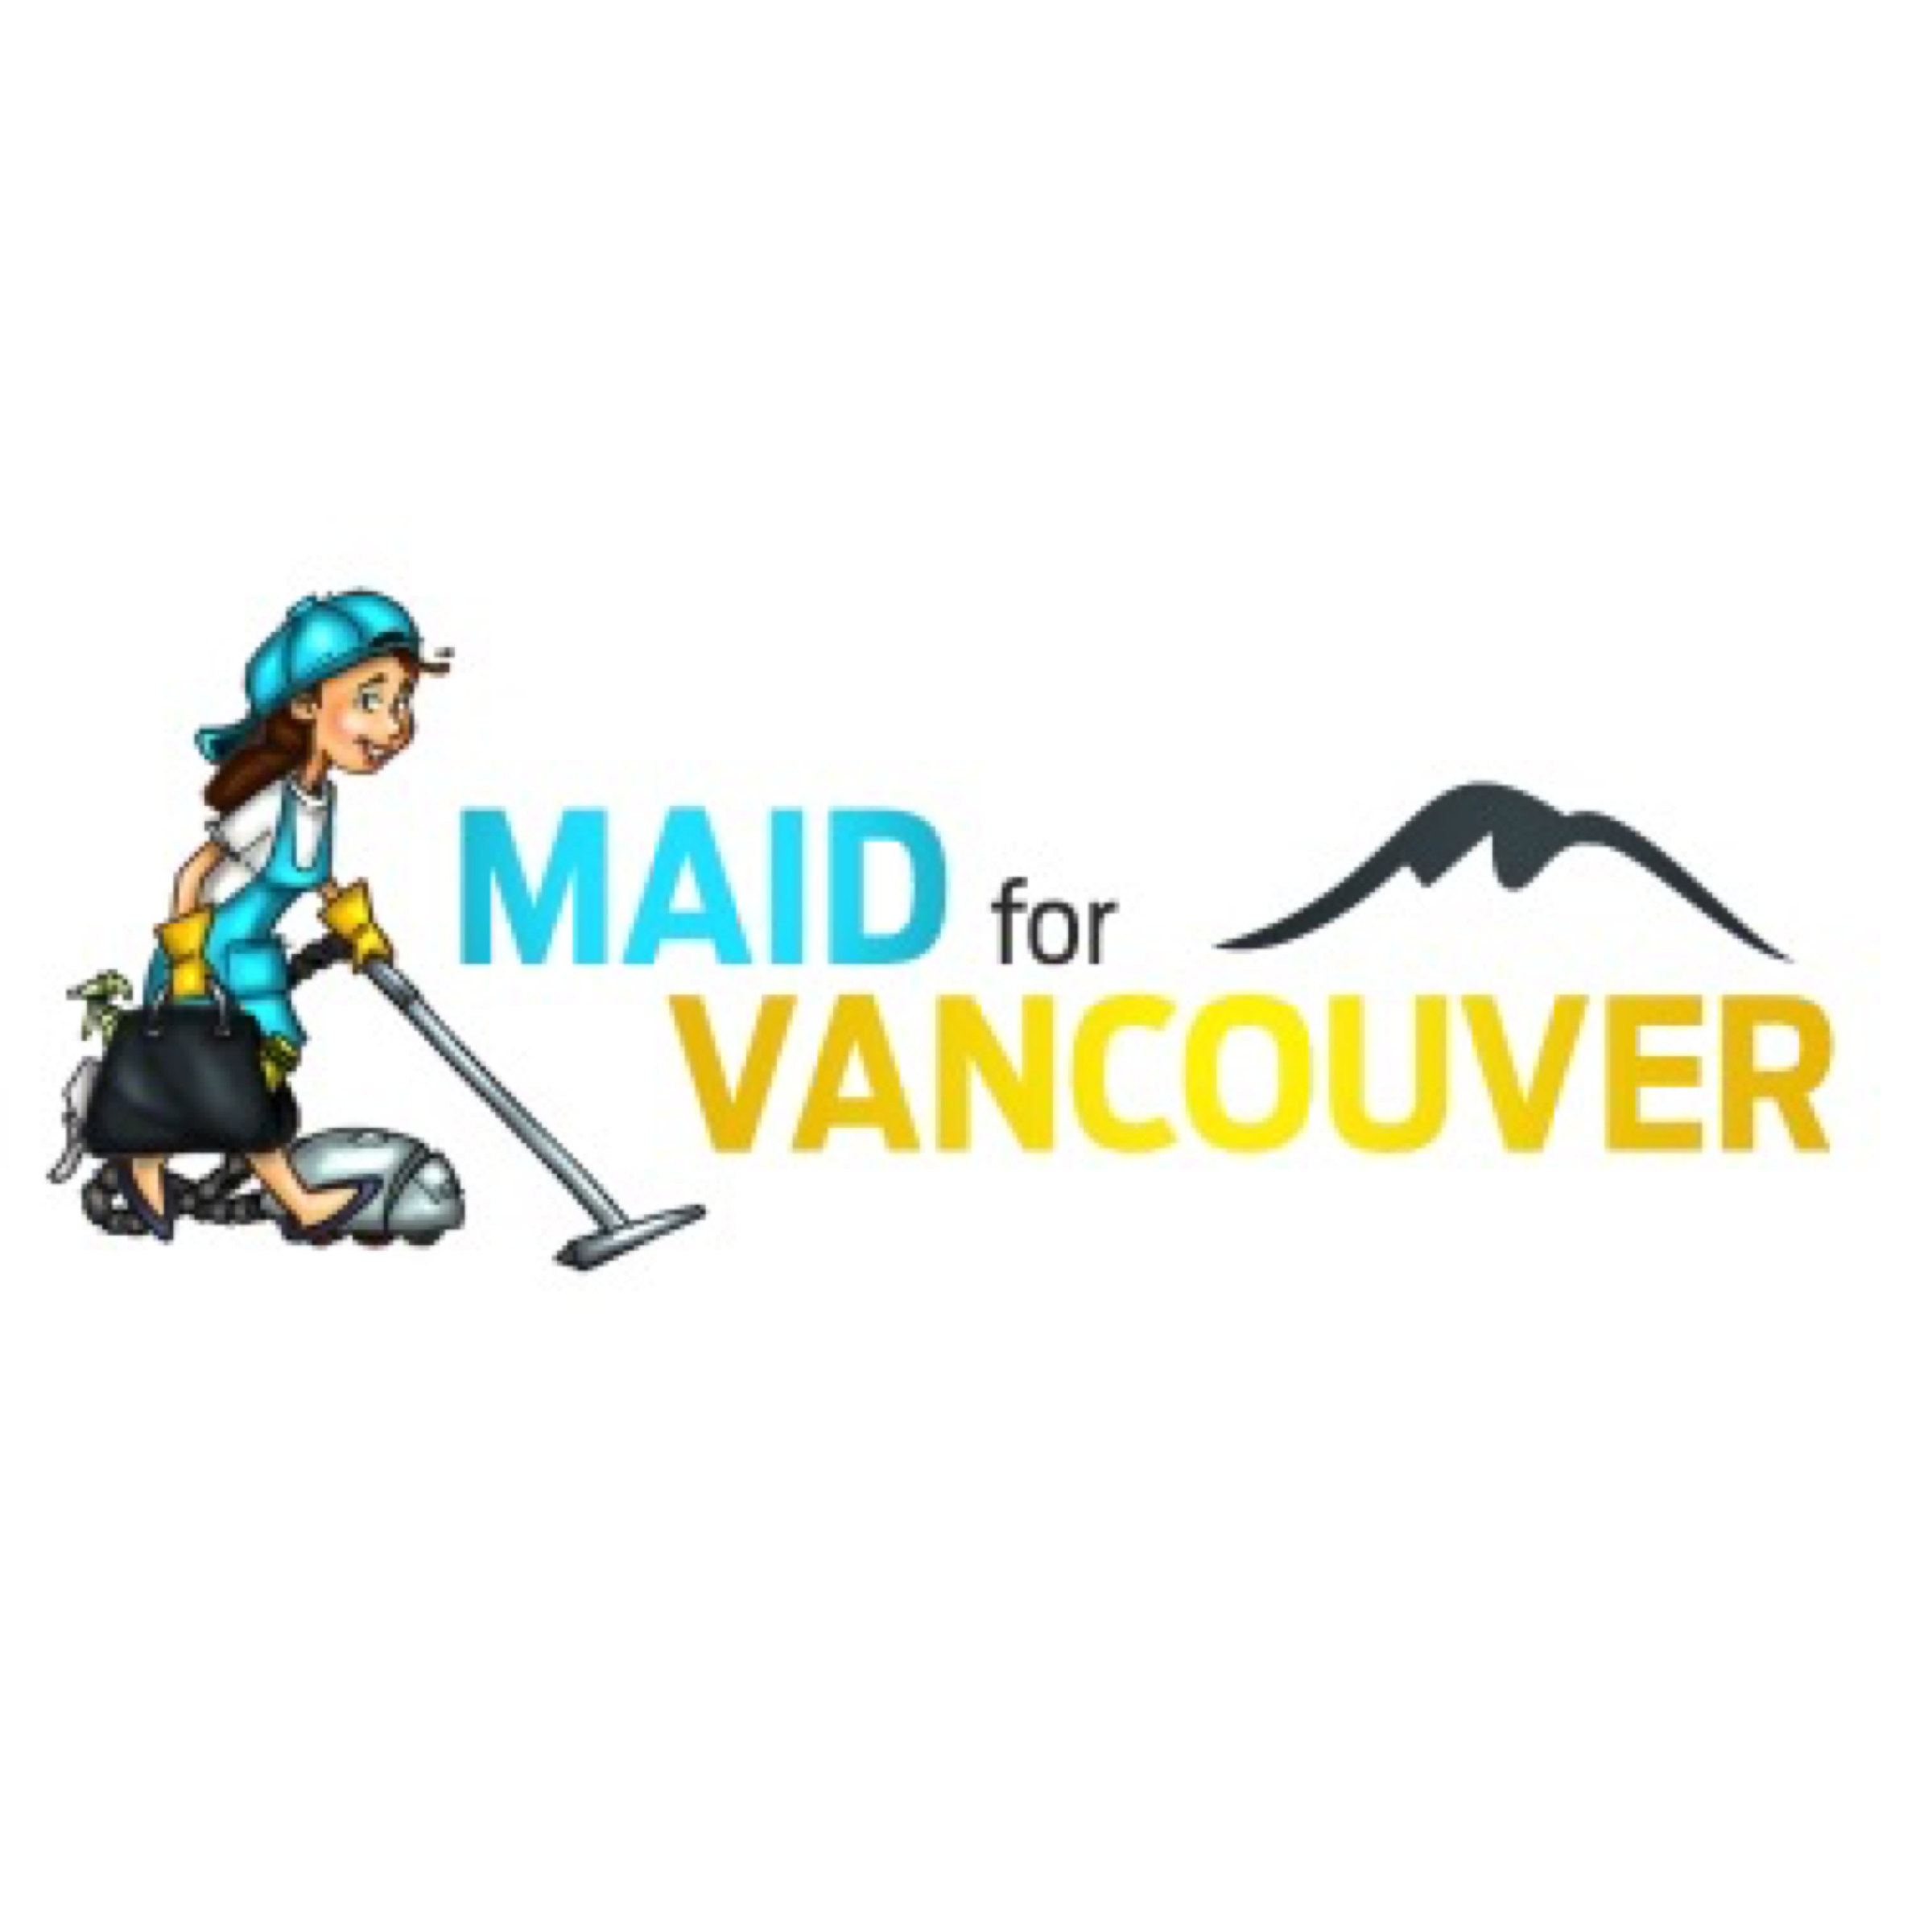 Maid for Vancouver